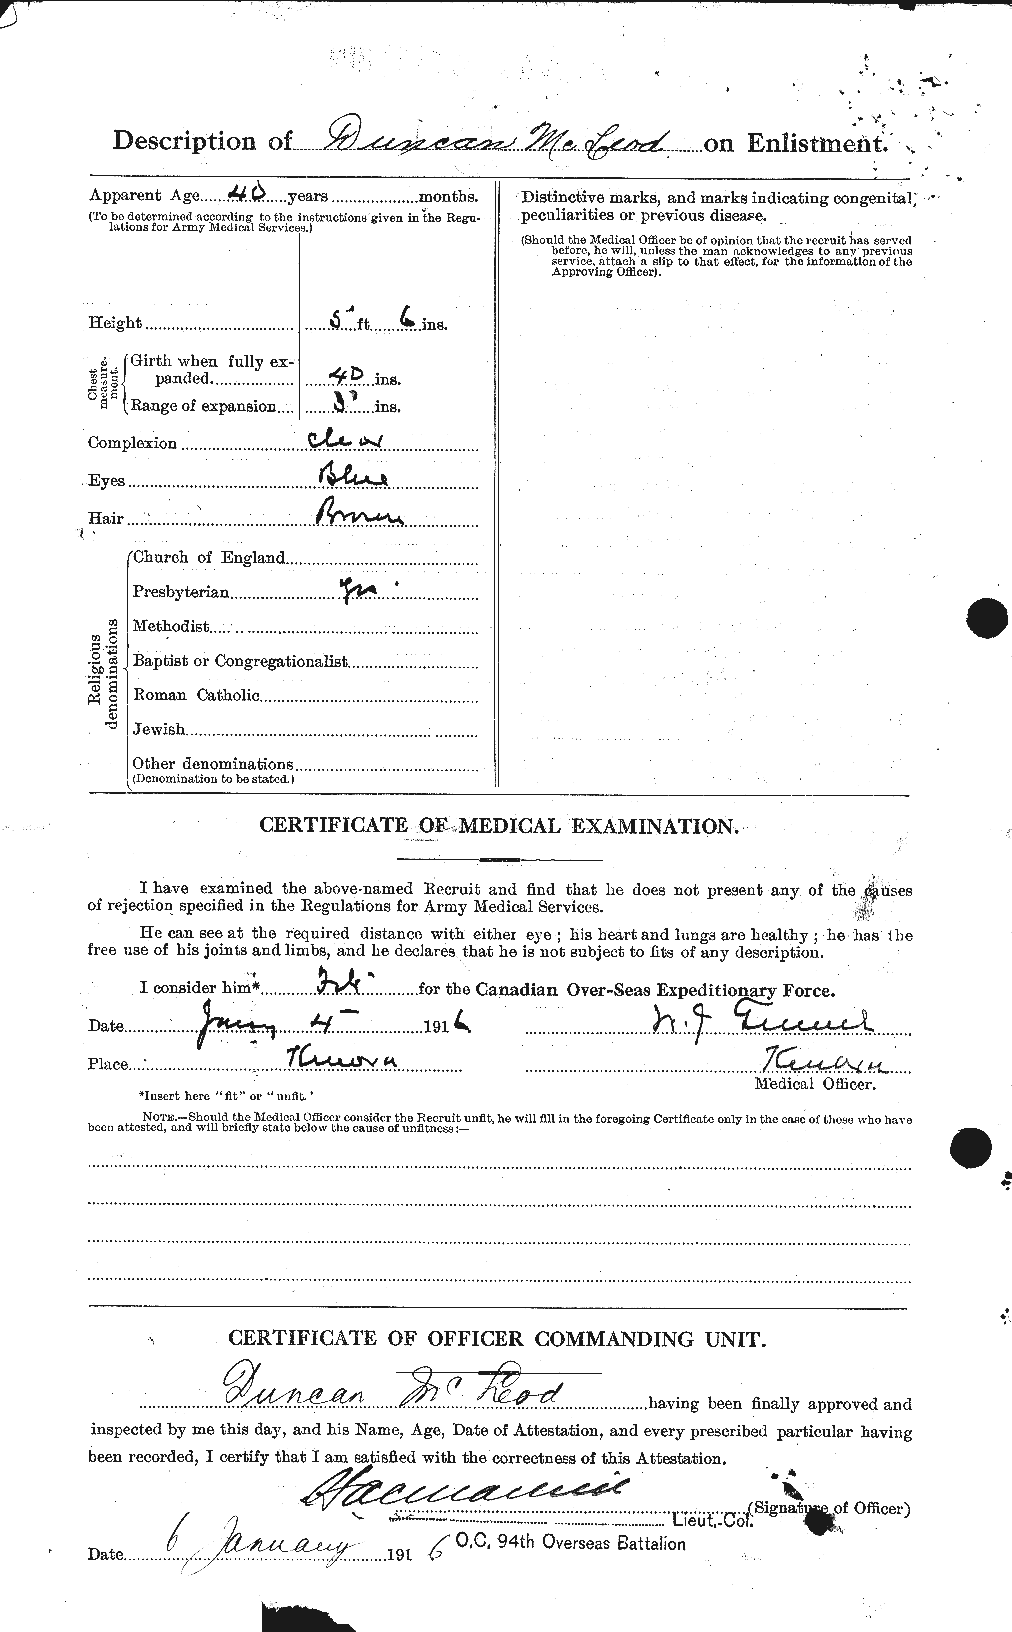 Personnel Records of the First World War - CEF 540509b